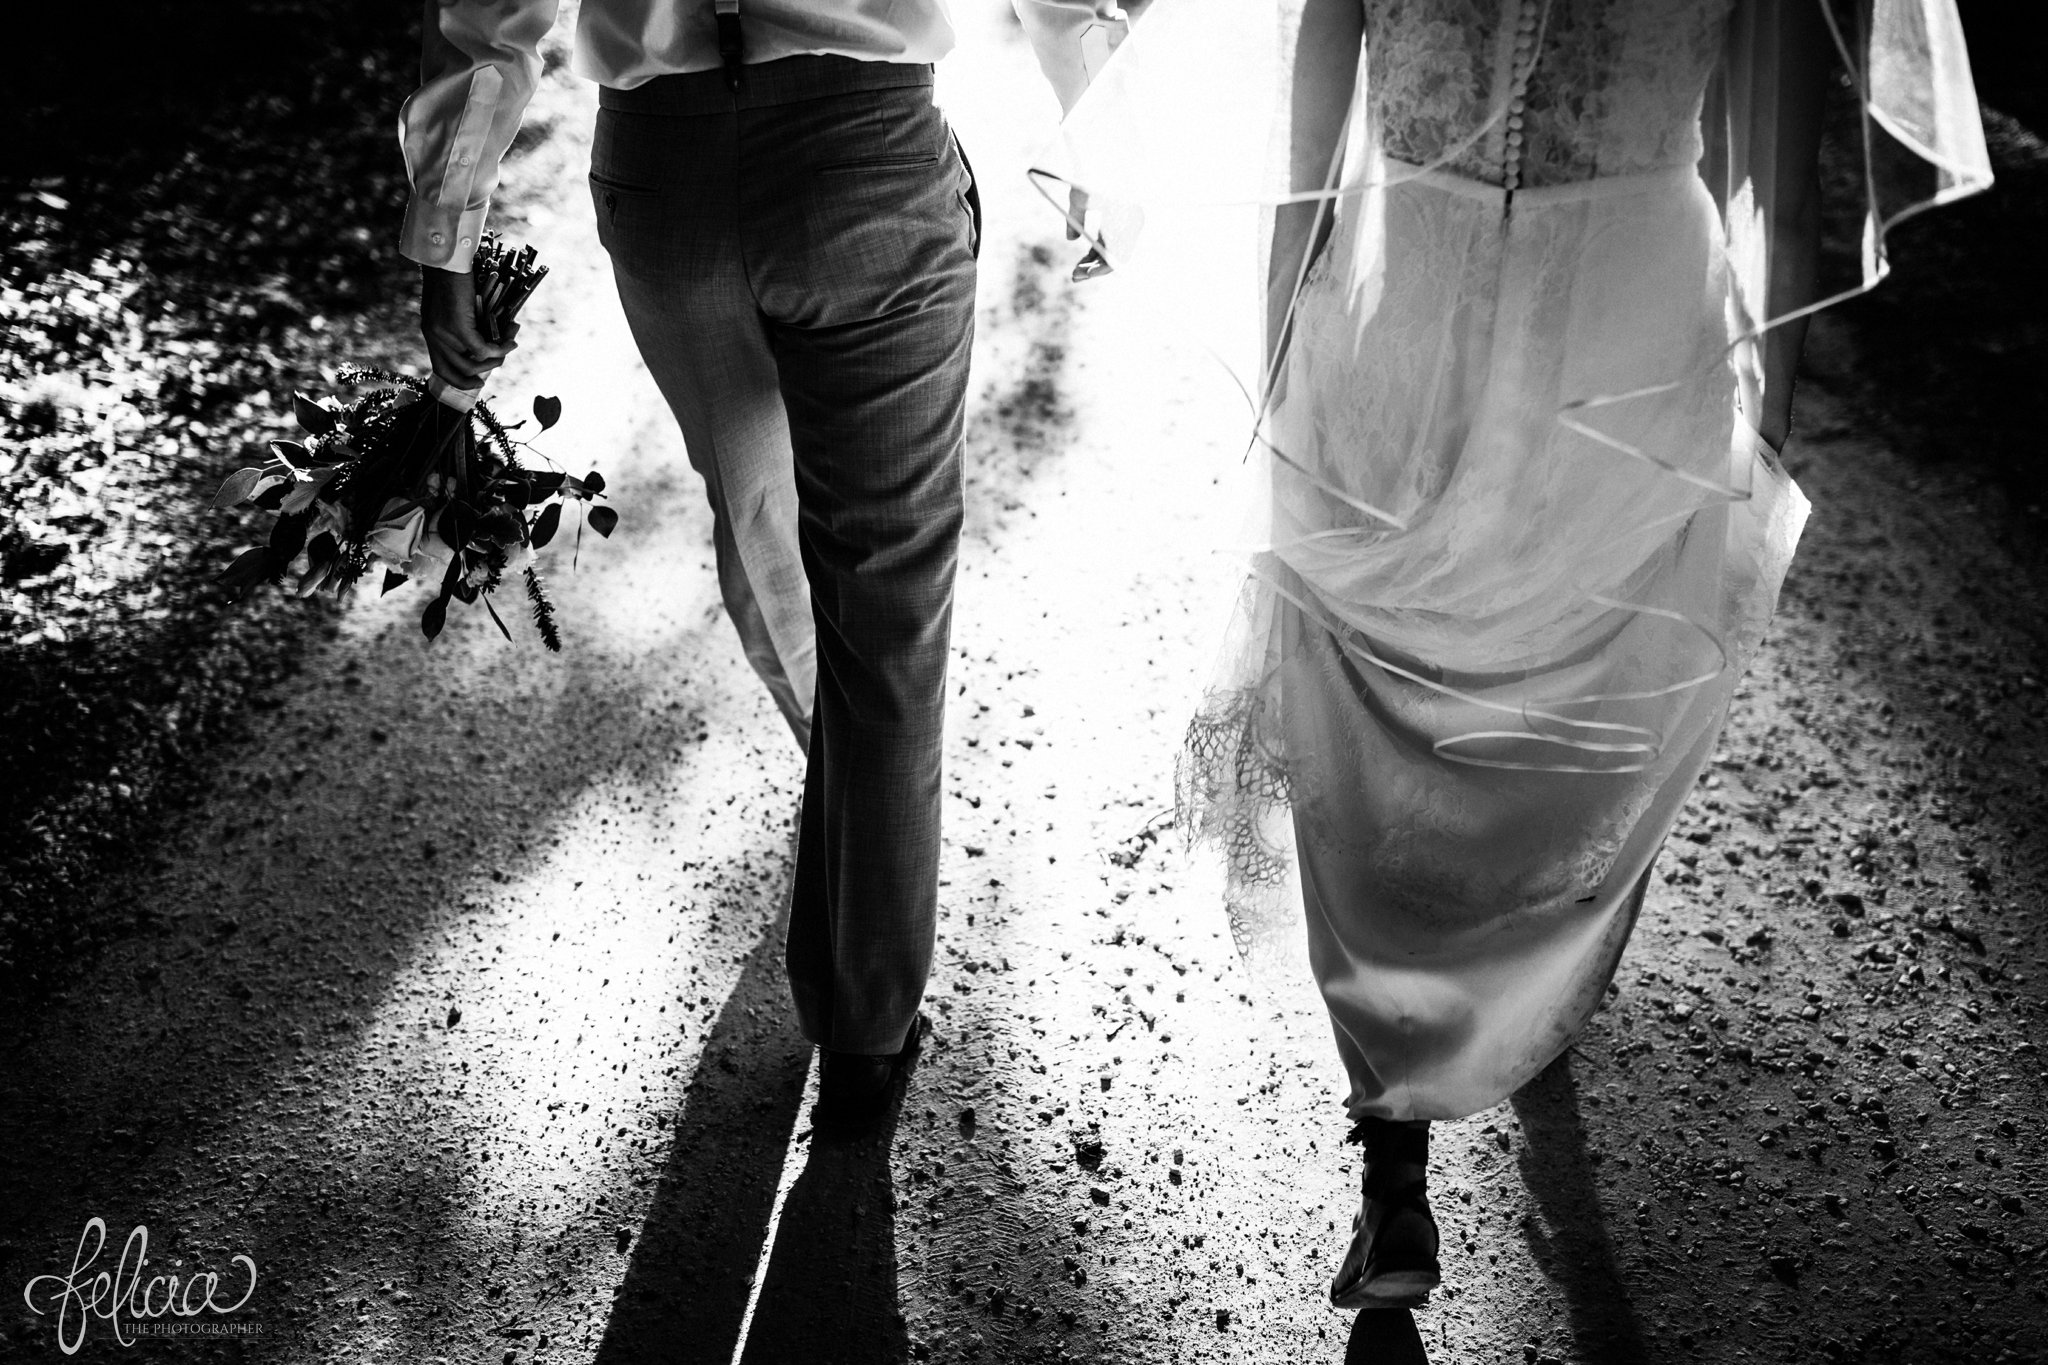 images by feliciathephotographer.com | destination wedding | the makey house | dave gibson coordinator | travel photographer | Savannah, georgia | southern | black and white | portrait | walking | holding hands | gravel road 